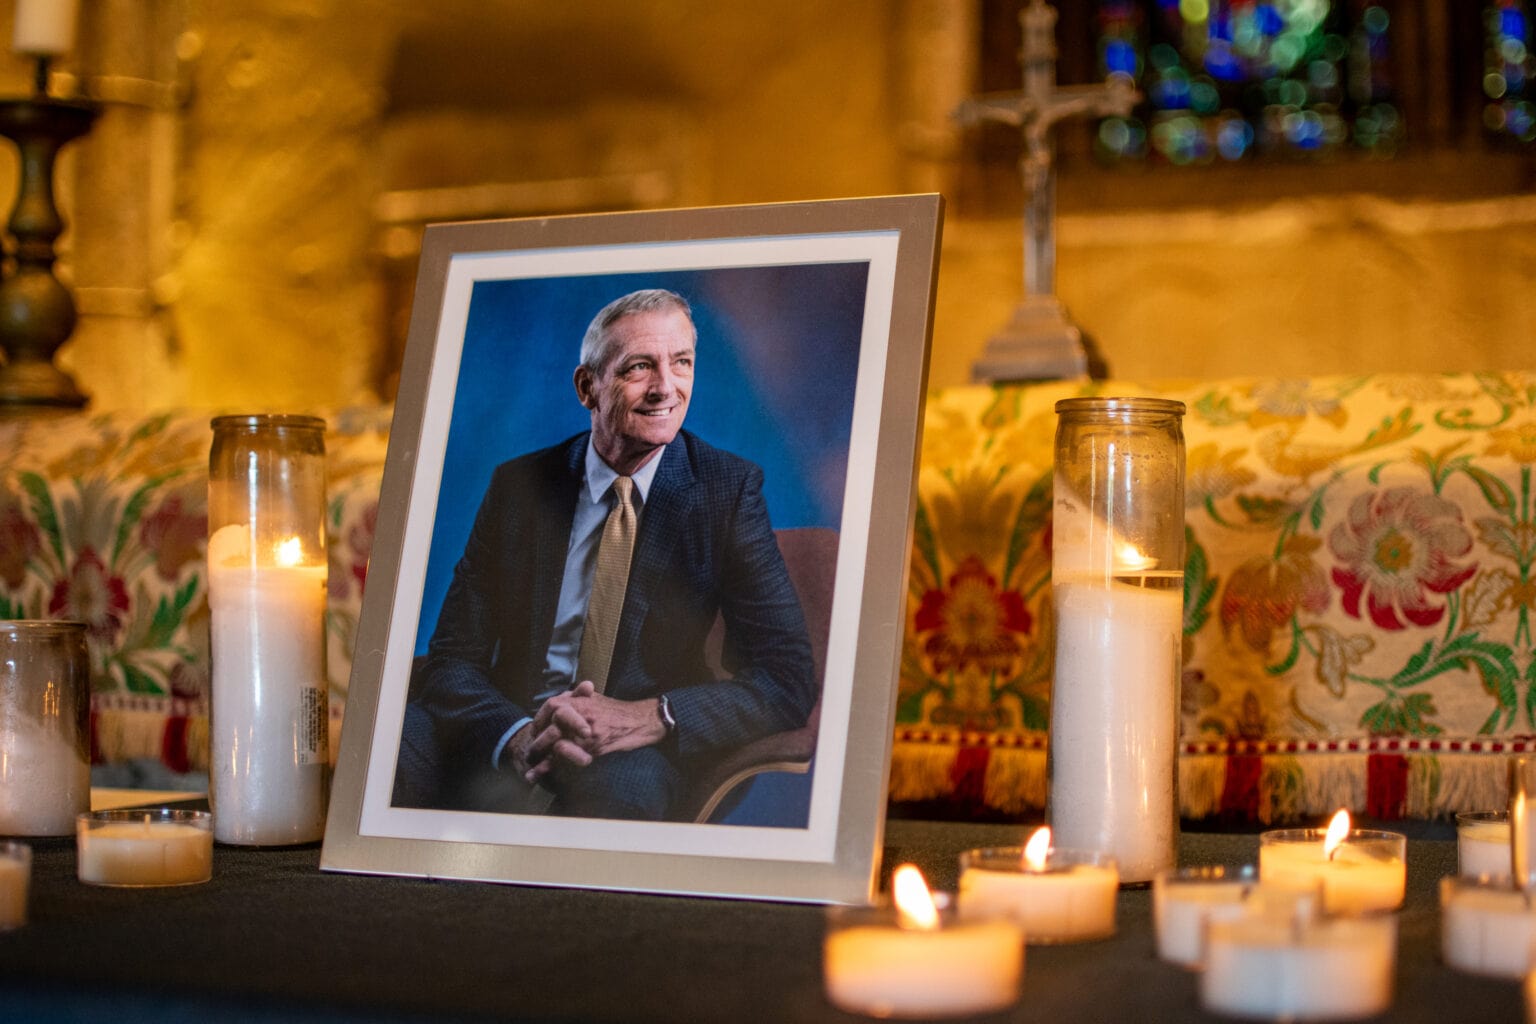 A potrait of President Lovell in a frame on a desk, surrounded by lit candles.